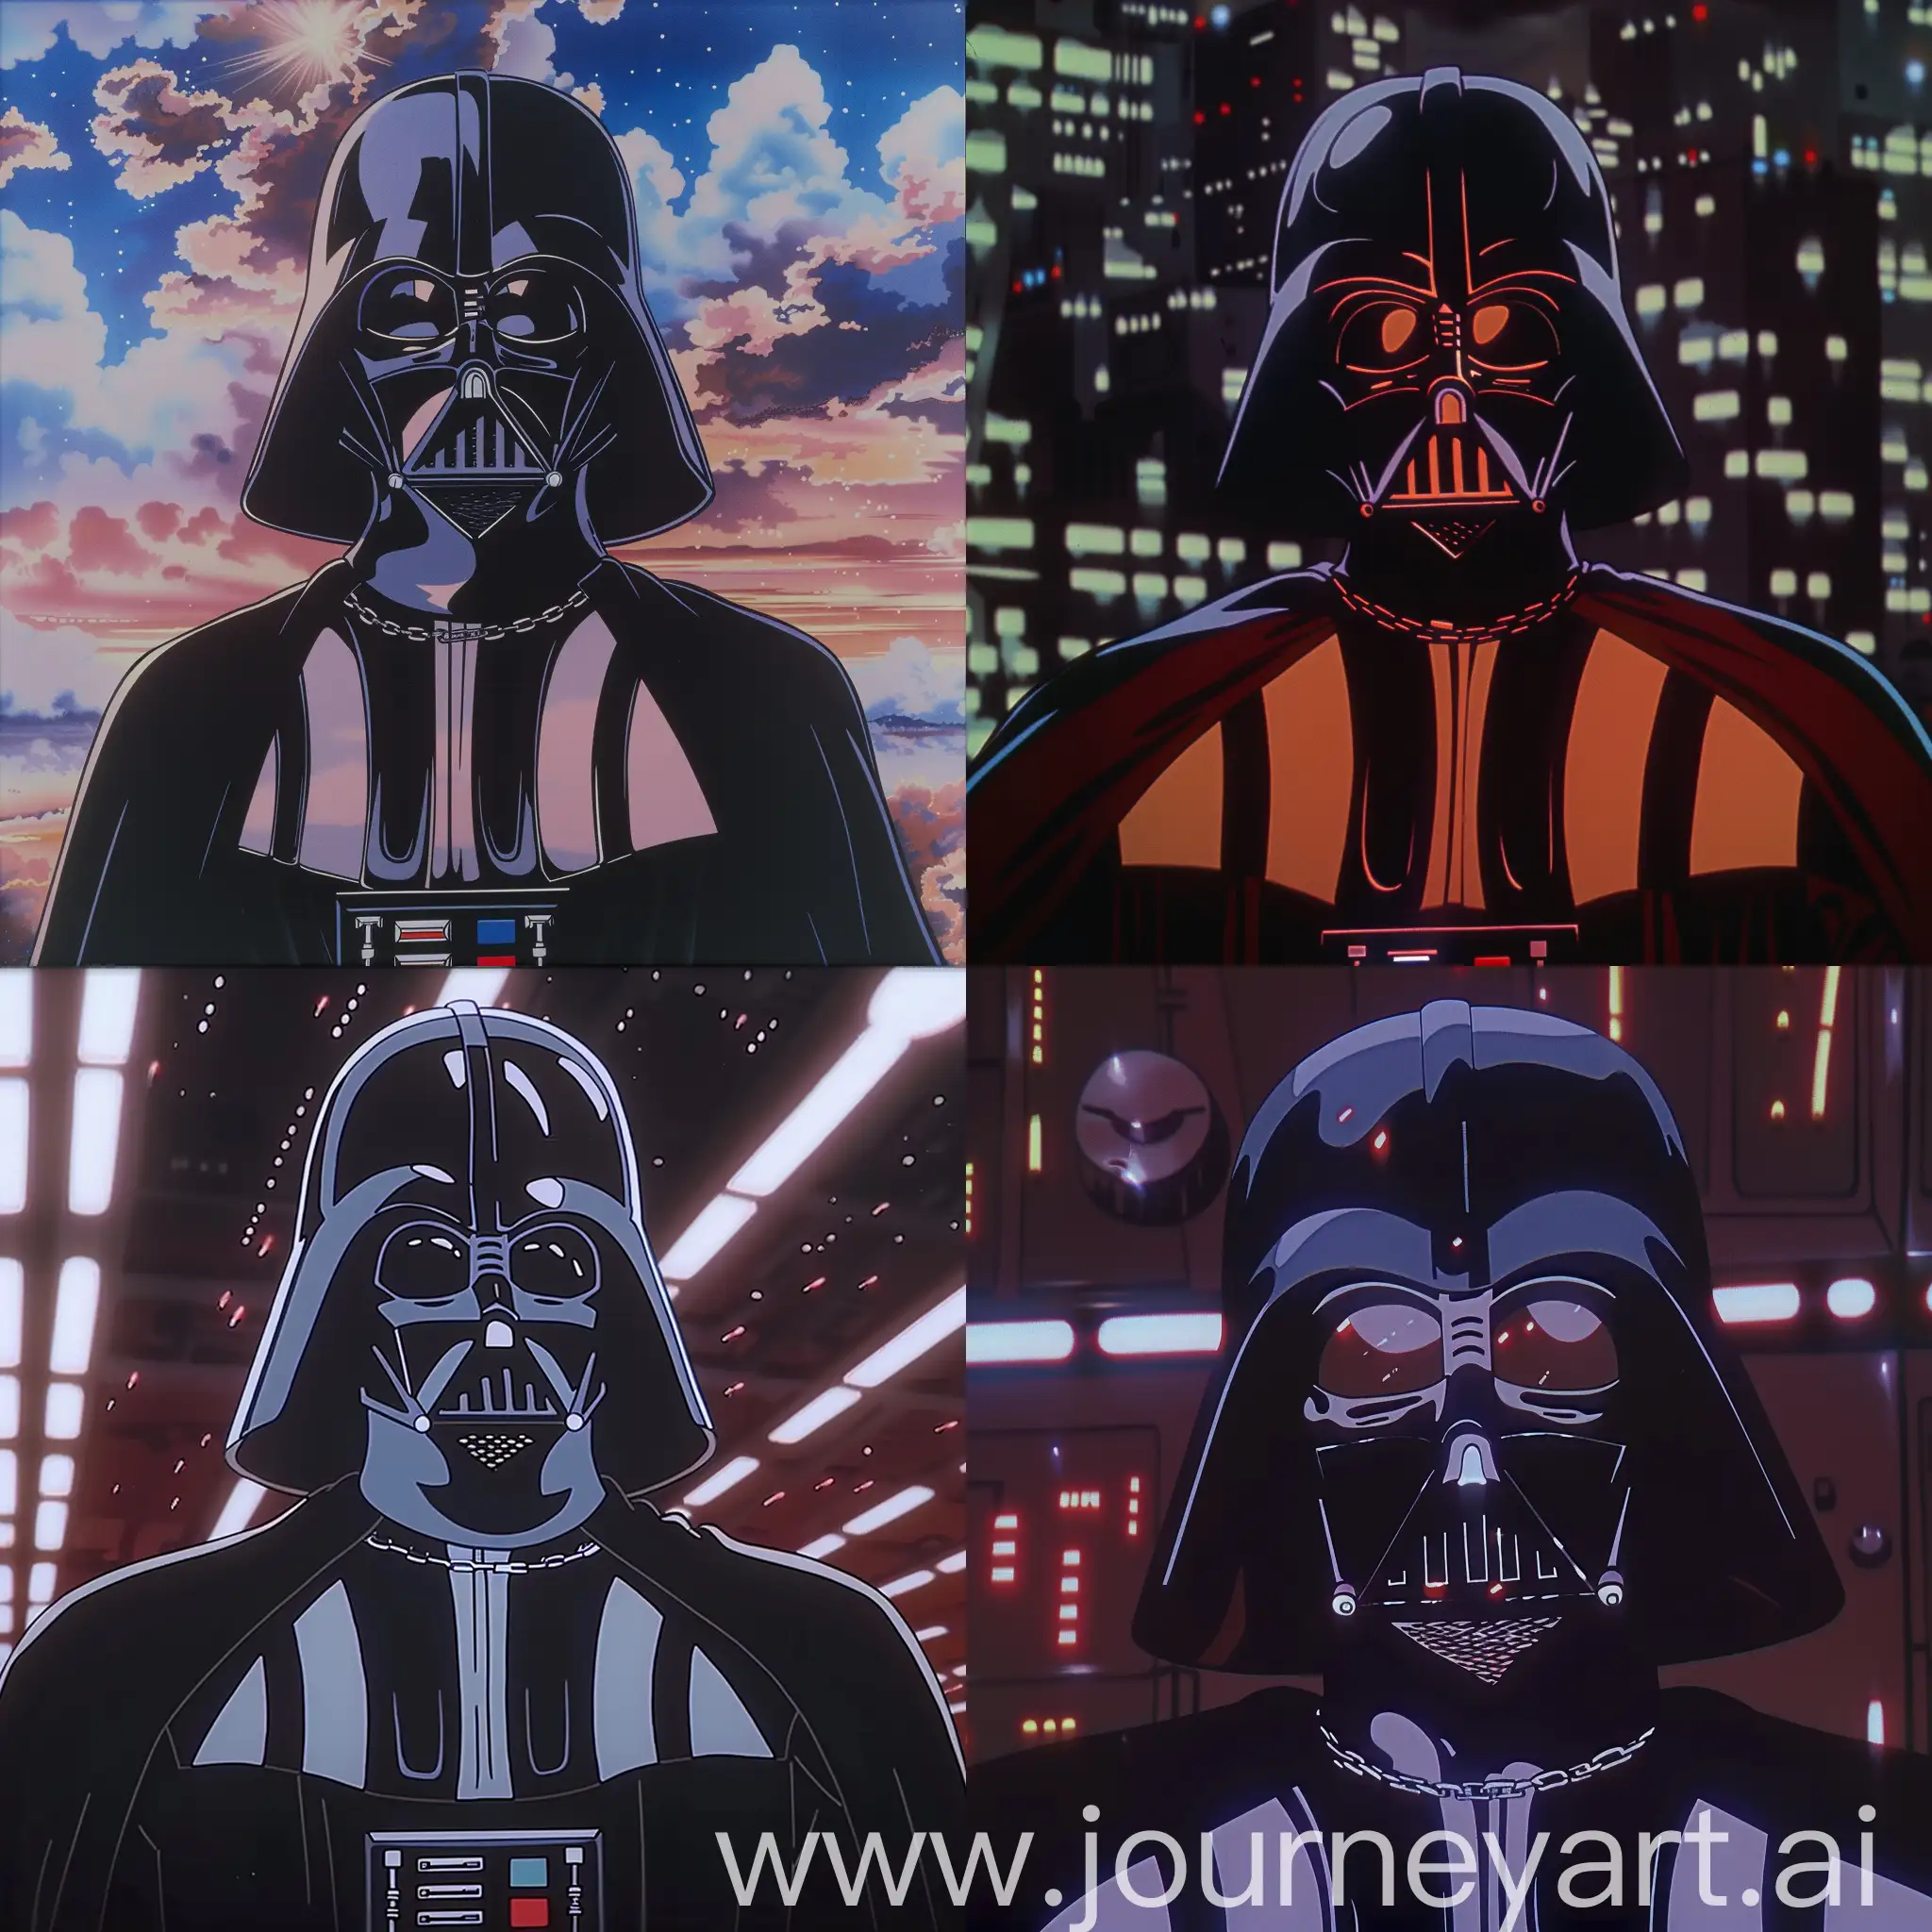 Darth Vader portrait in anime genre film, dvd screenshot from anime film, hell costume and 80s anime film composition